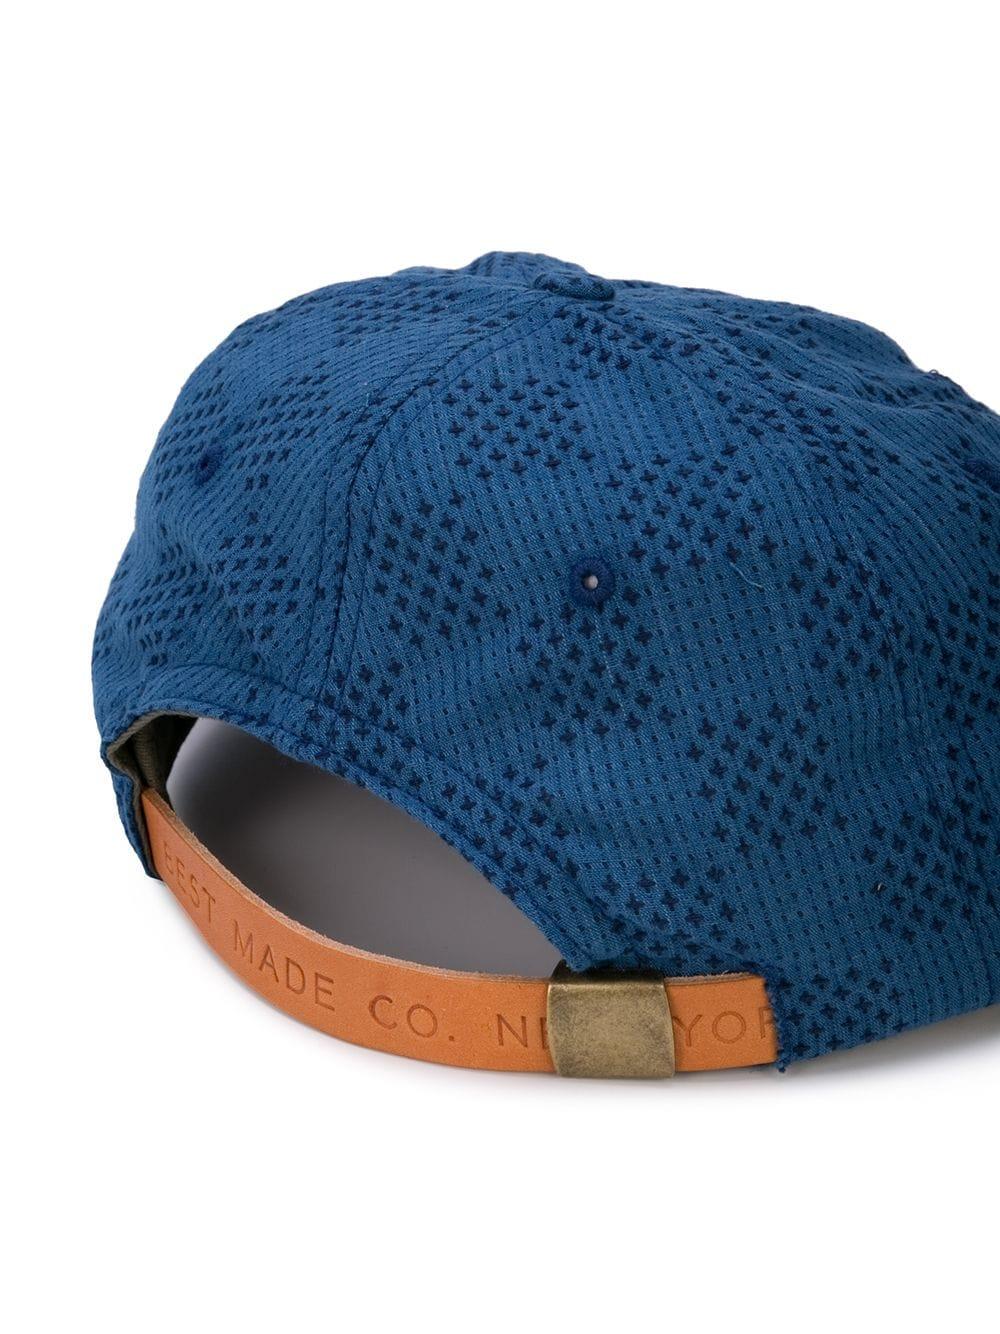 Best Made Company The Japanese Checkerboard Ball Cap in Blue 